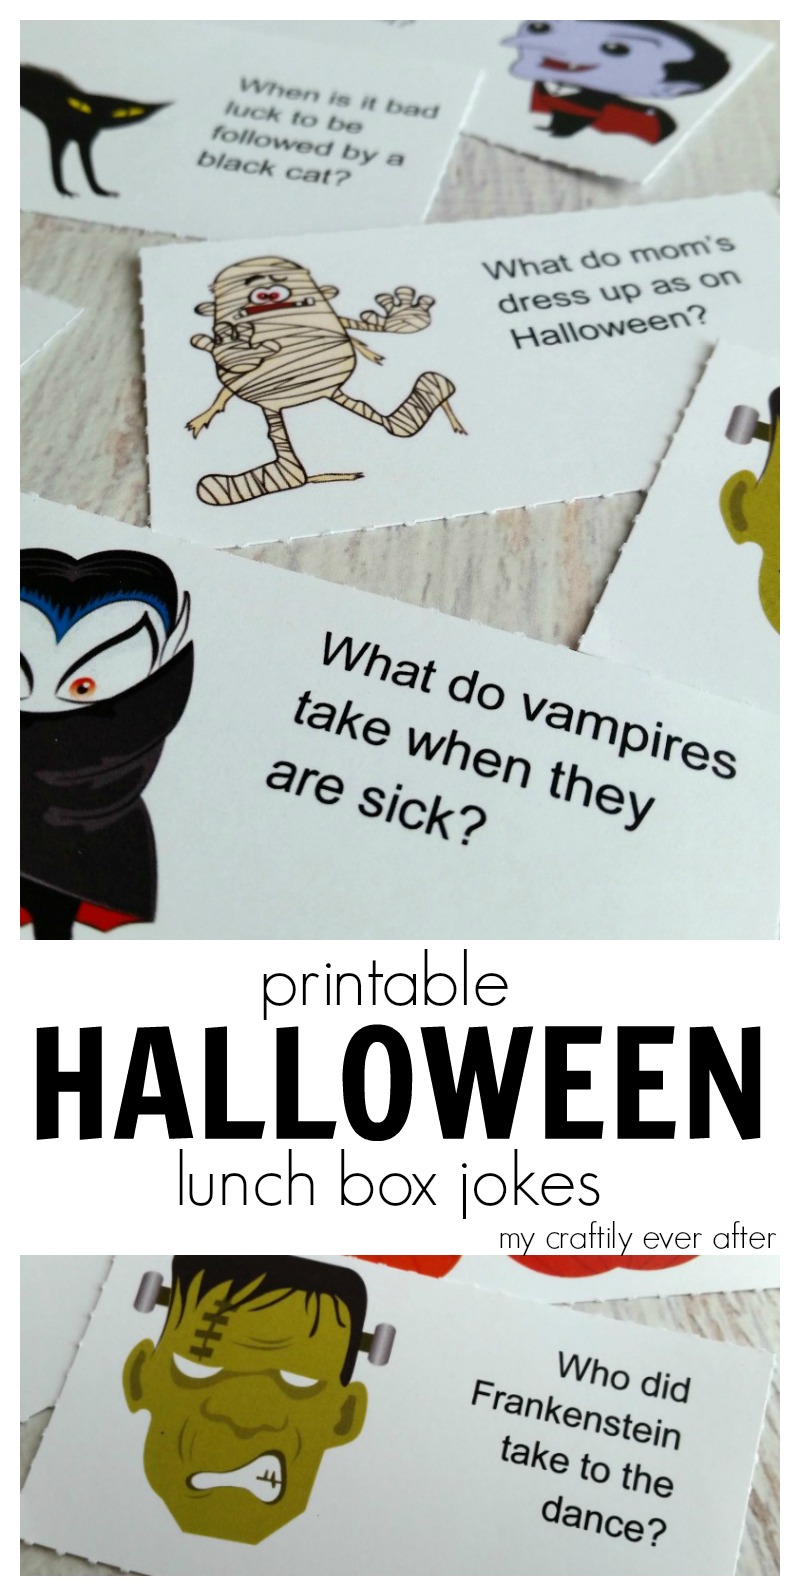 printable-halloween-lunch-box-jokes-my-craftily-ever-after